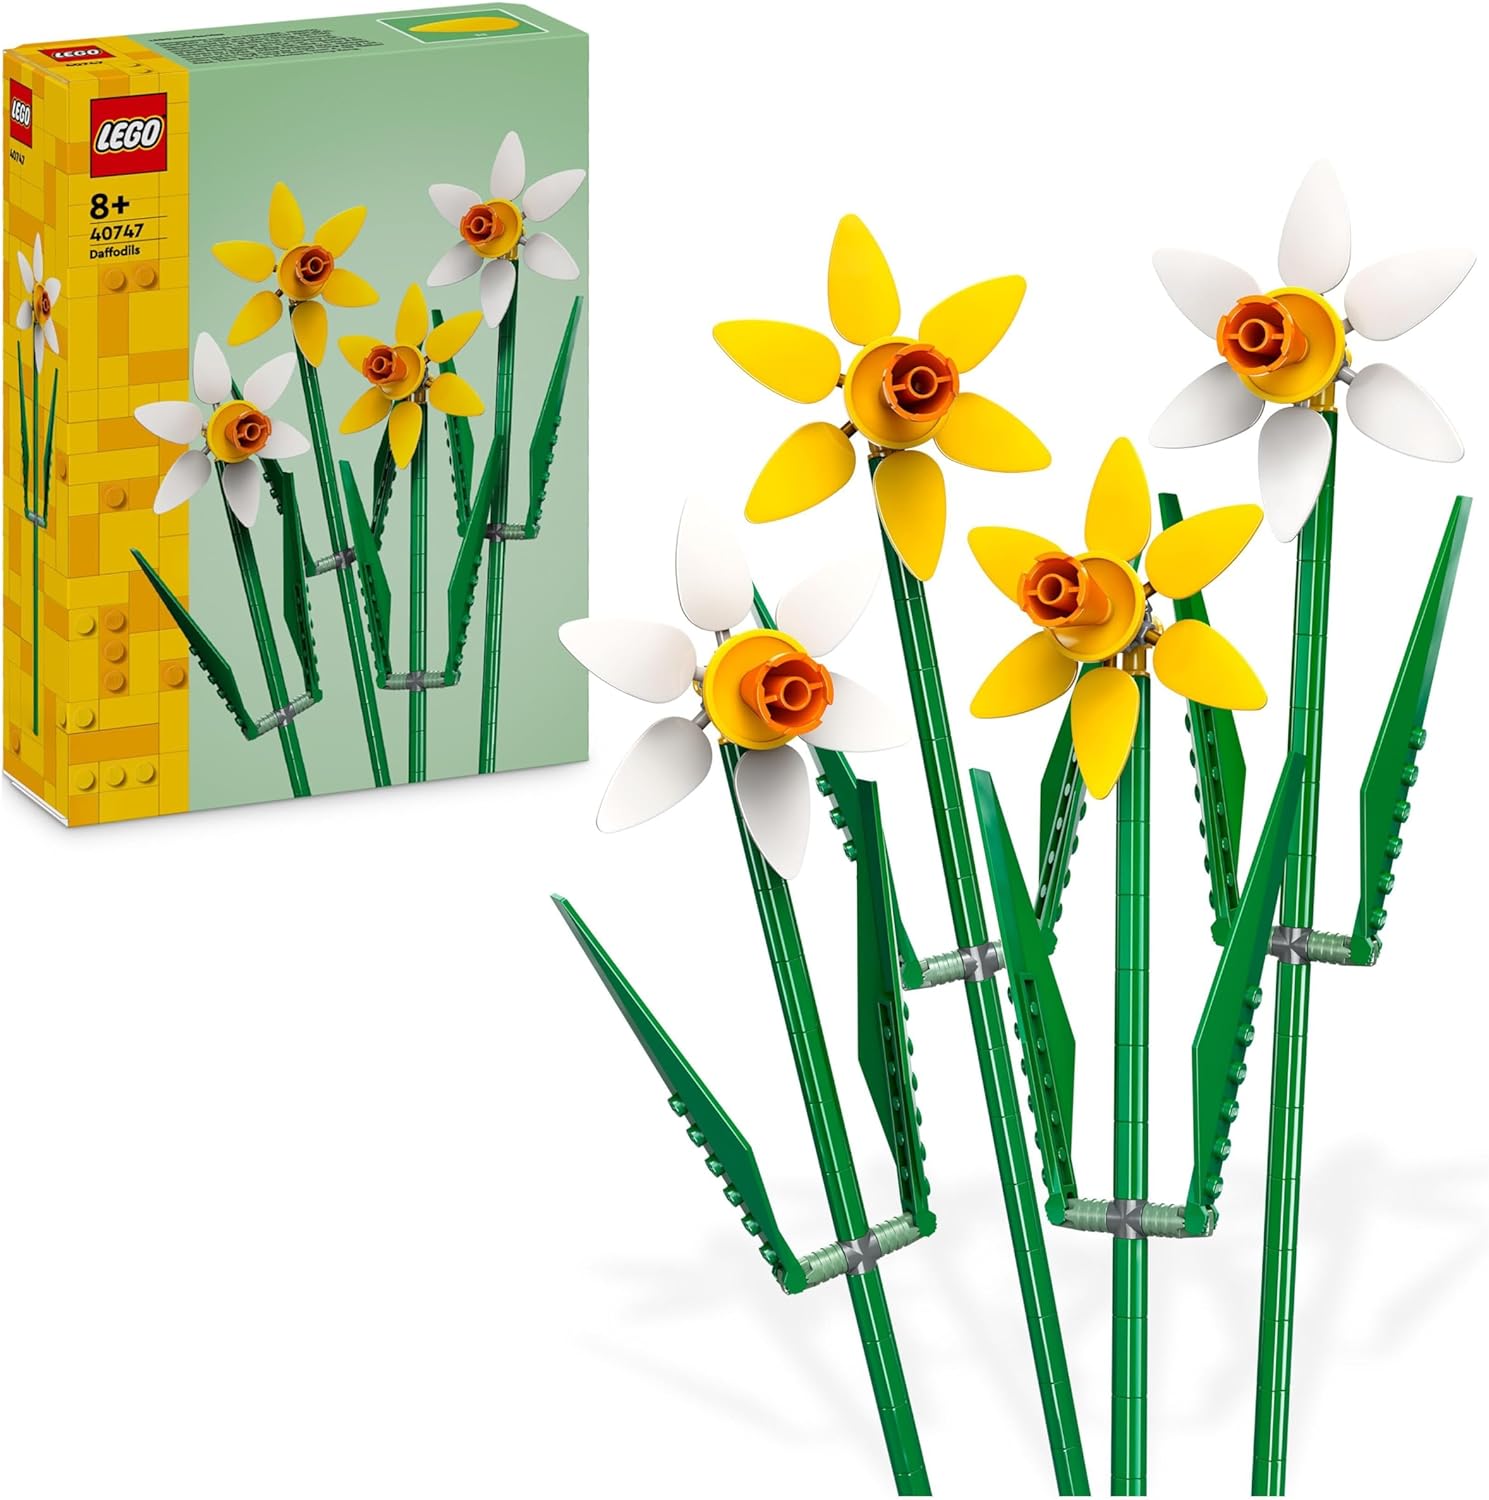 LEGO Creator 40747 Daffodils, Artificial Flower Set for Kids, Bouquet Kit, Bedroom or Desk Decoration, Gift for Girls, Boys, Teens and Fans